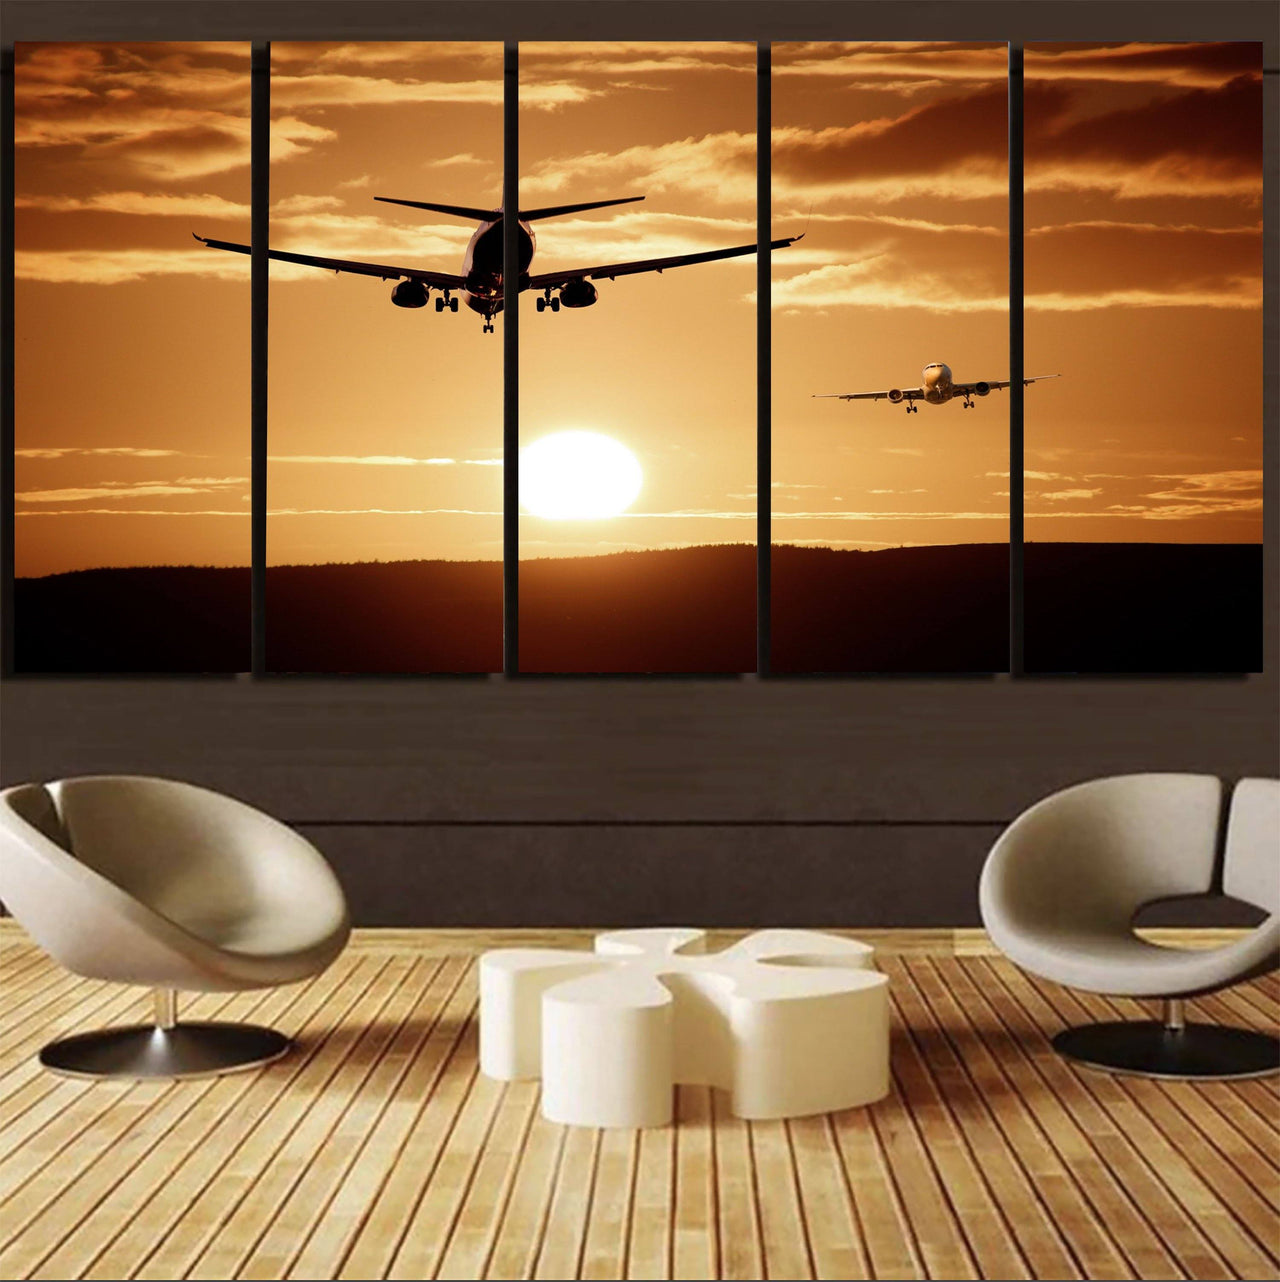 Two Aeroplanes During Sunset Printed Canvas Prints (5 Pieces) Aviation Shop 